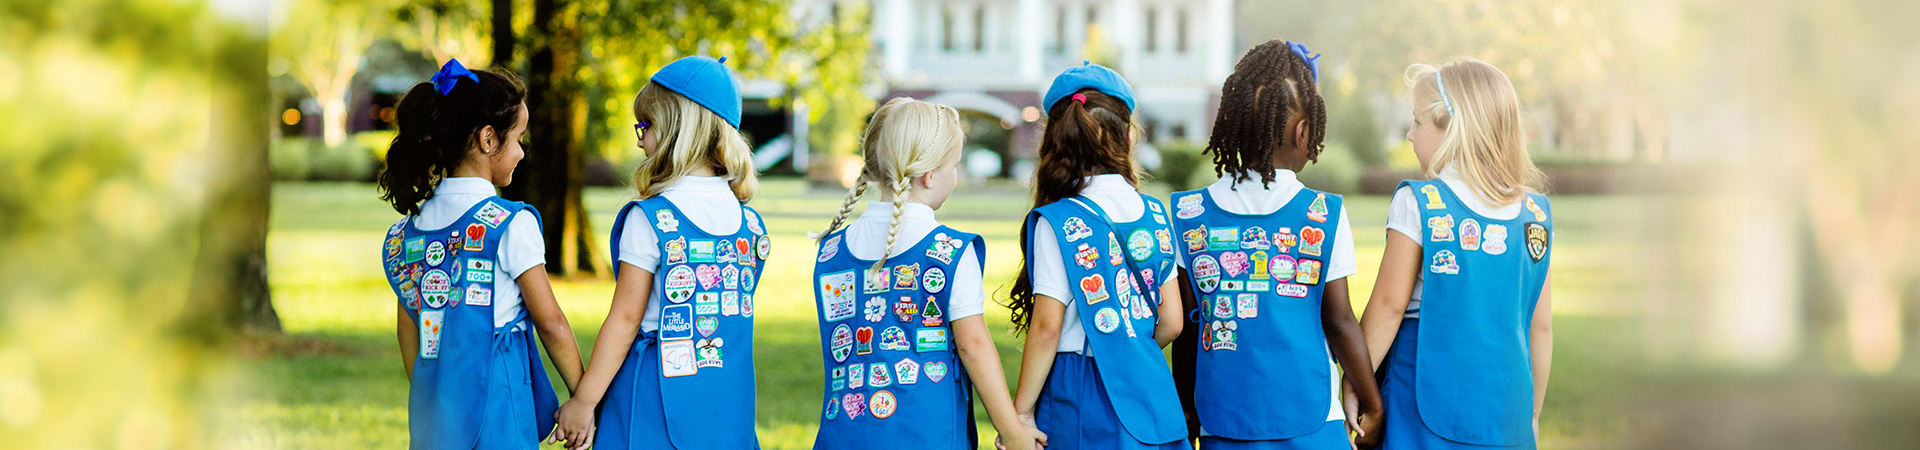  Girl Scout Daisies showing back of uniforms with fun patches 